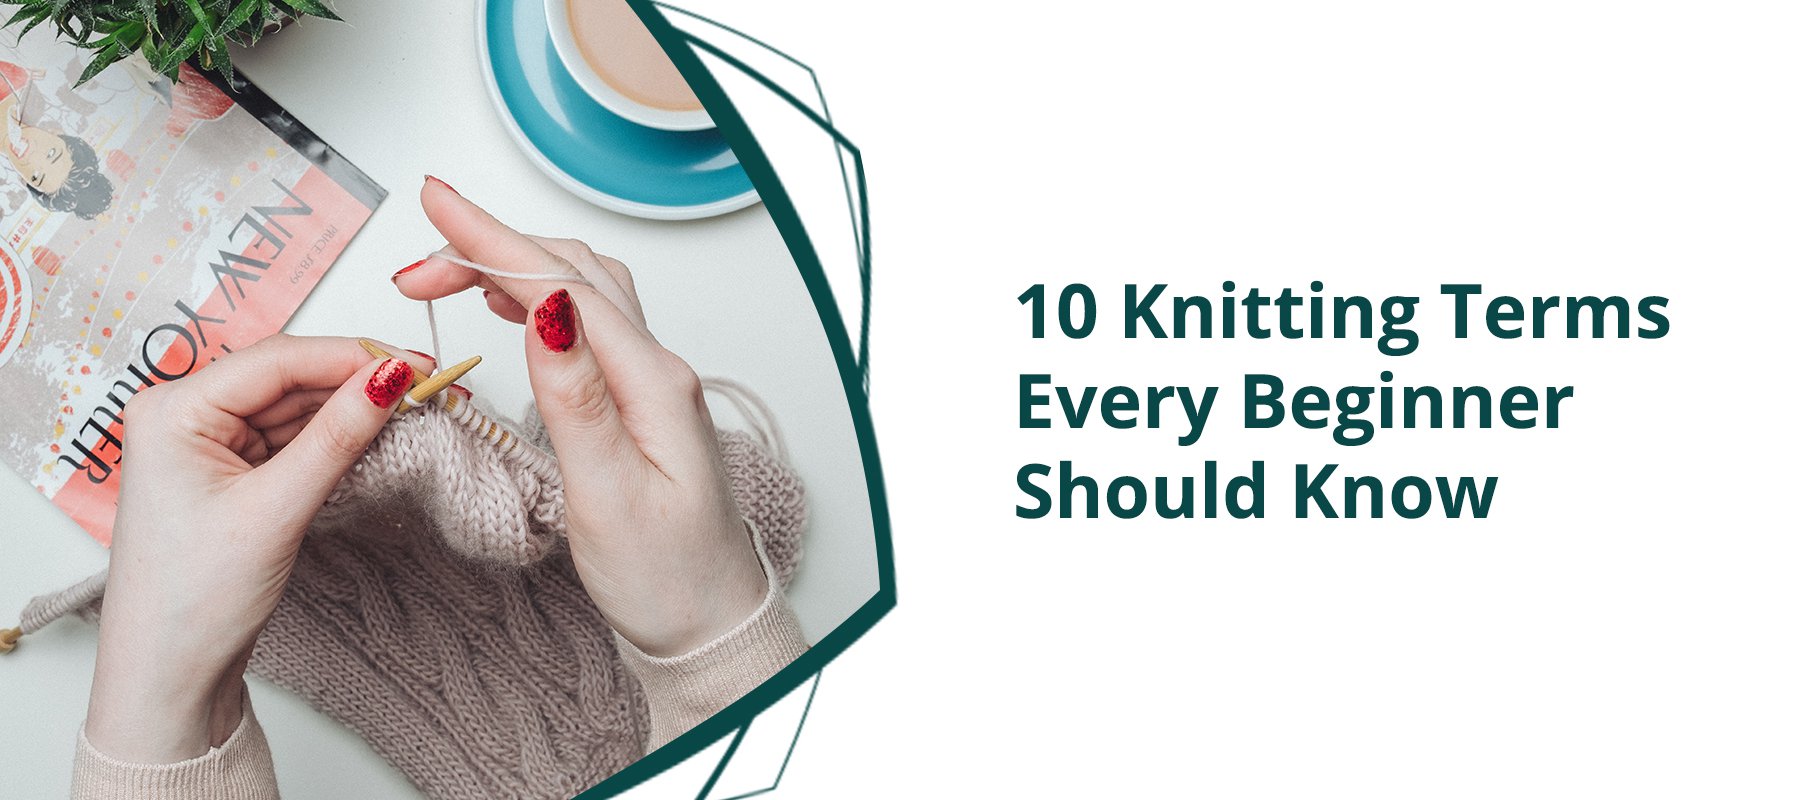 10 Knitting Terms Every Beginner Should Know